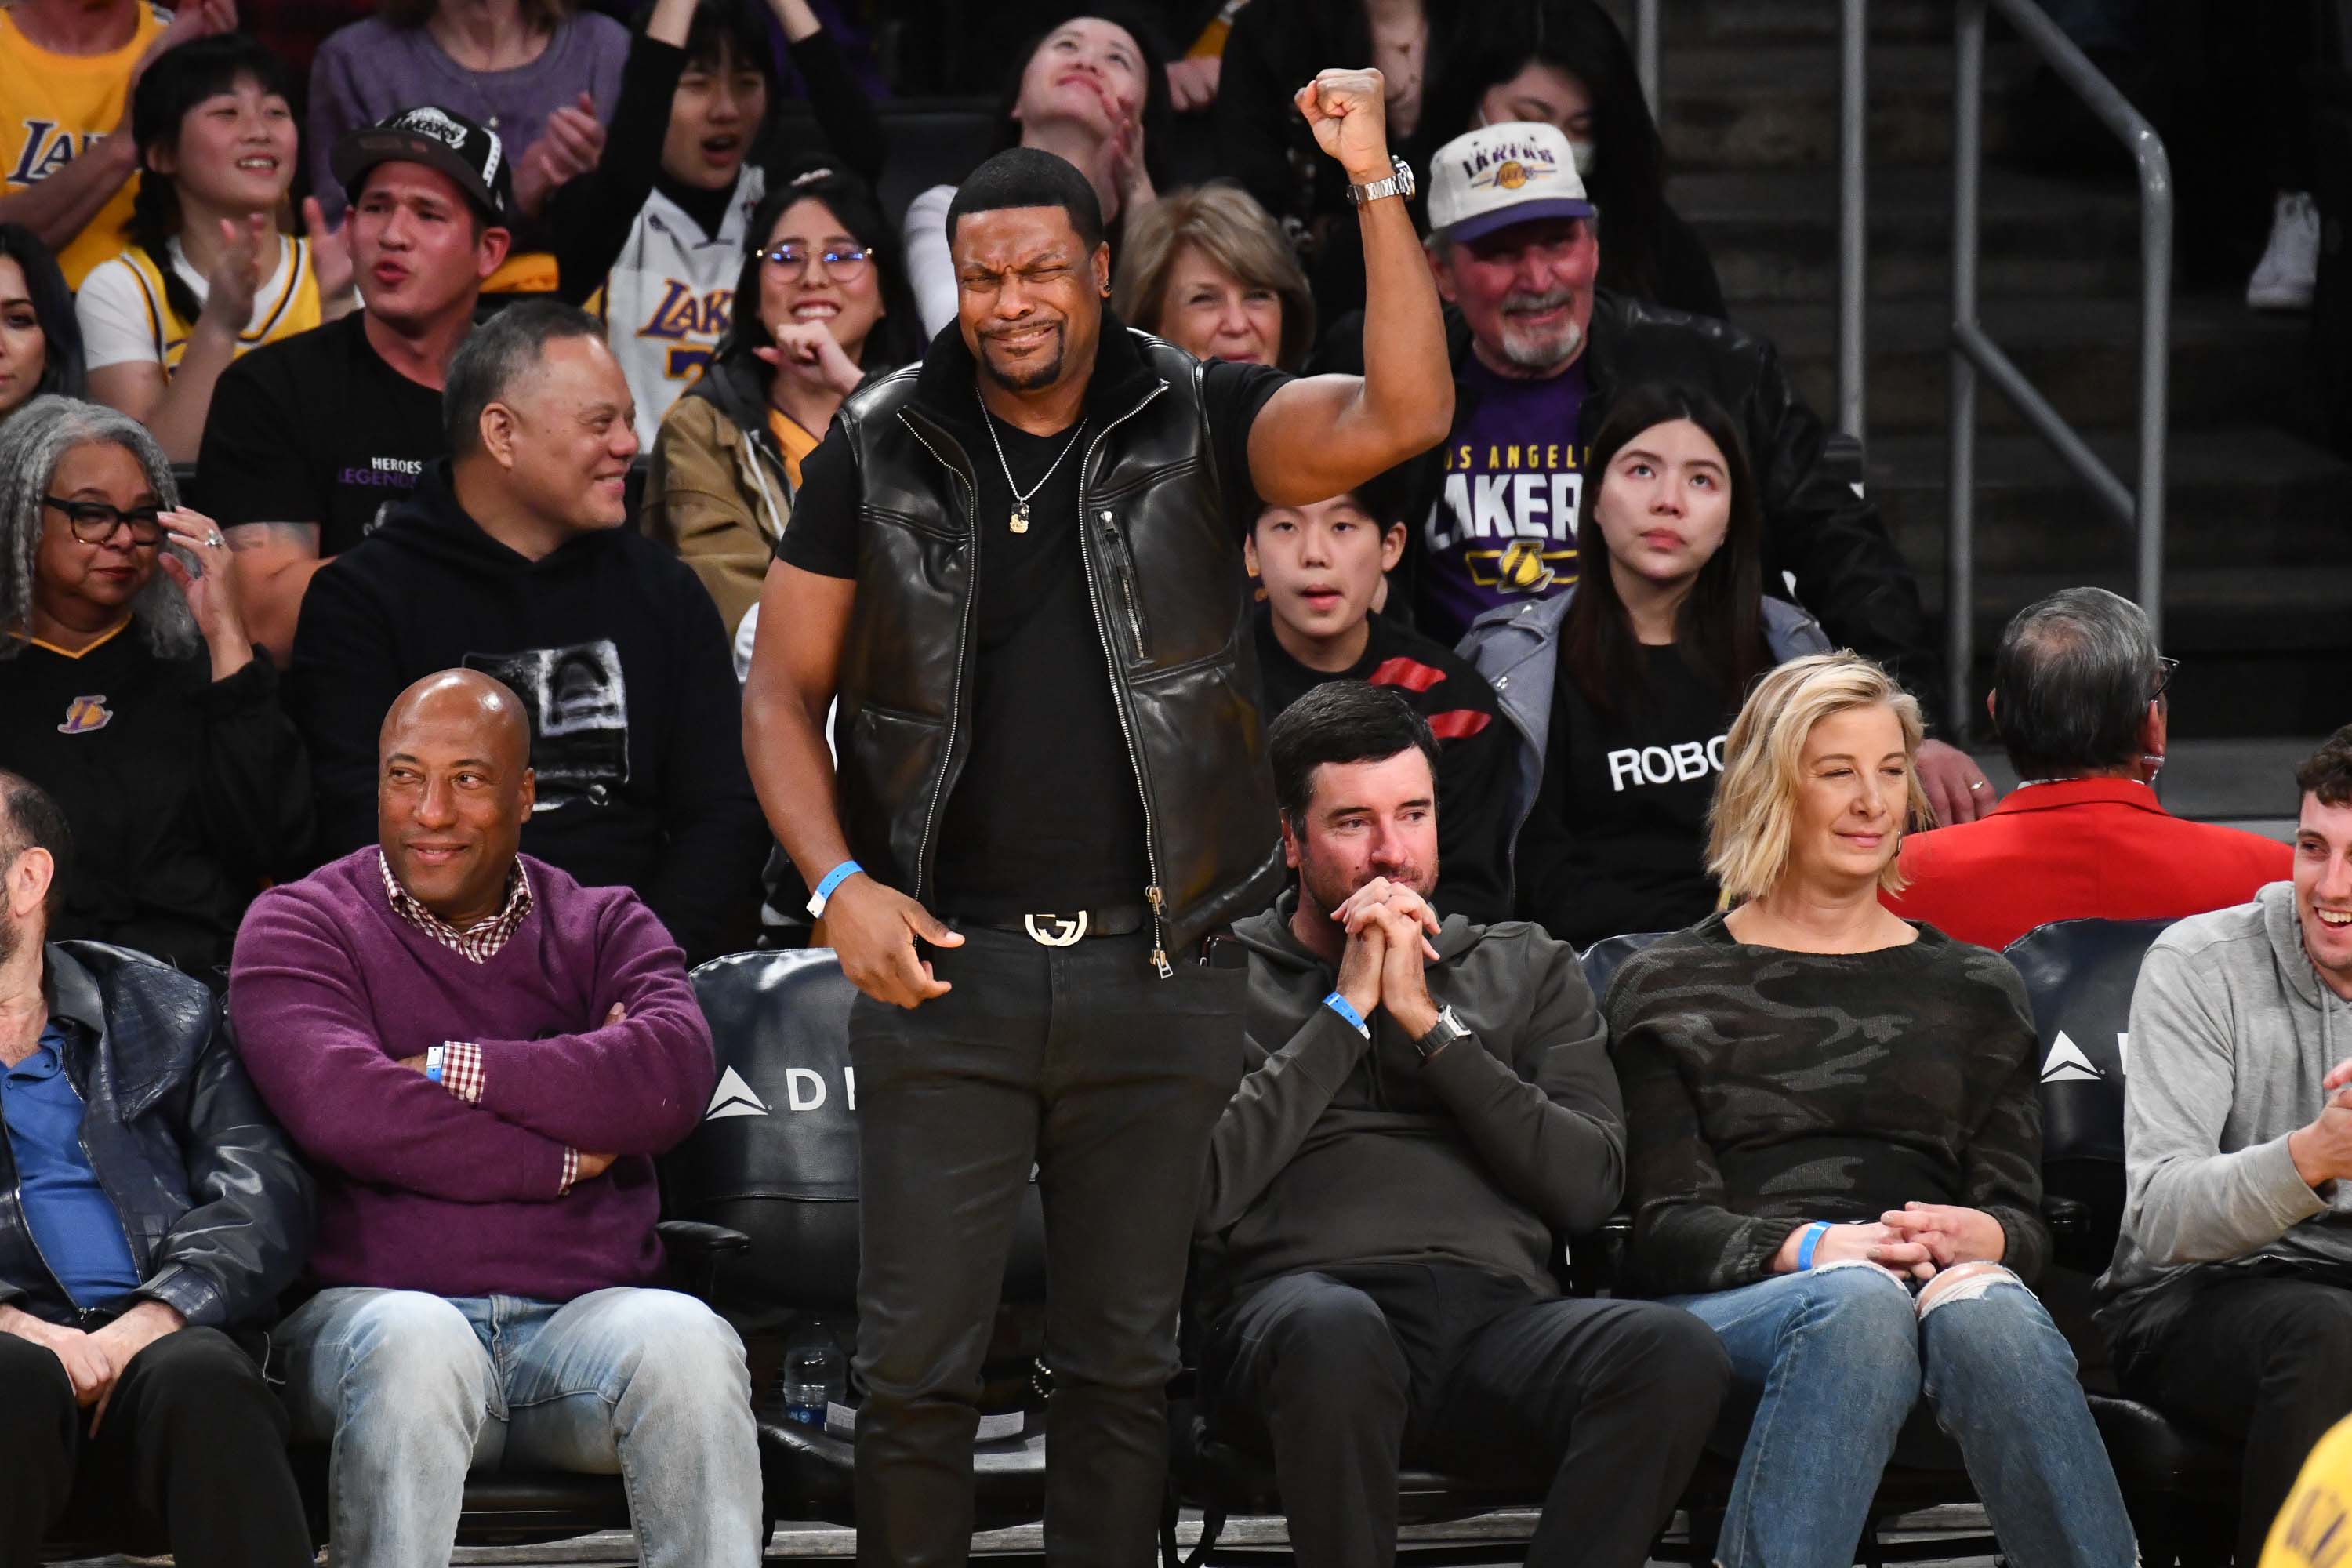 Lakers fans get Staples Center buzzing again with activity - Los